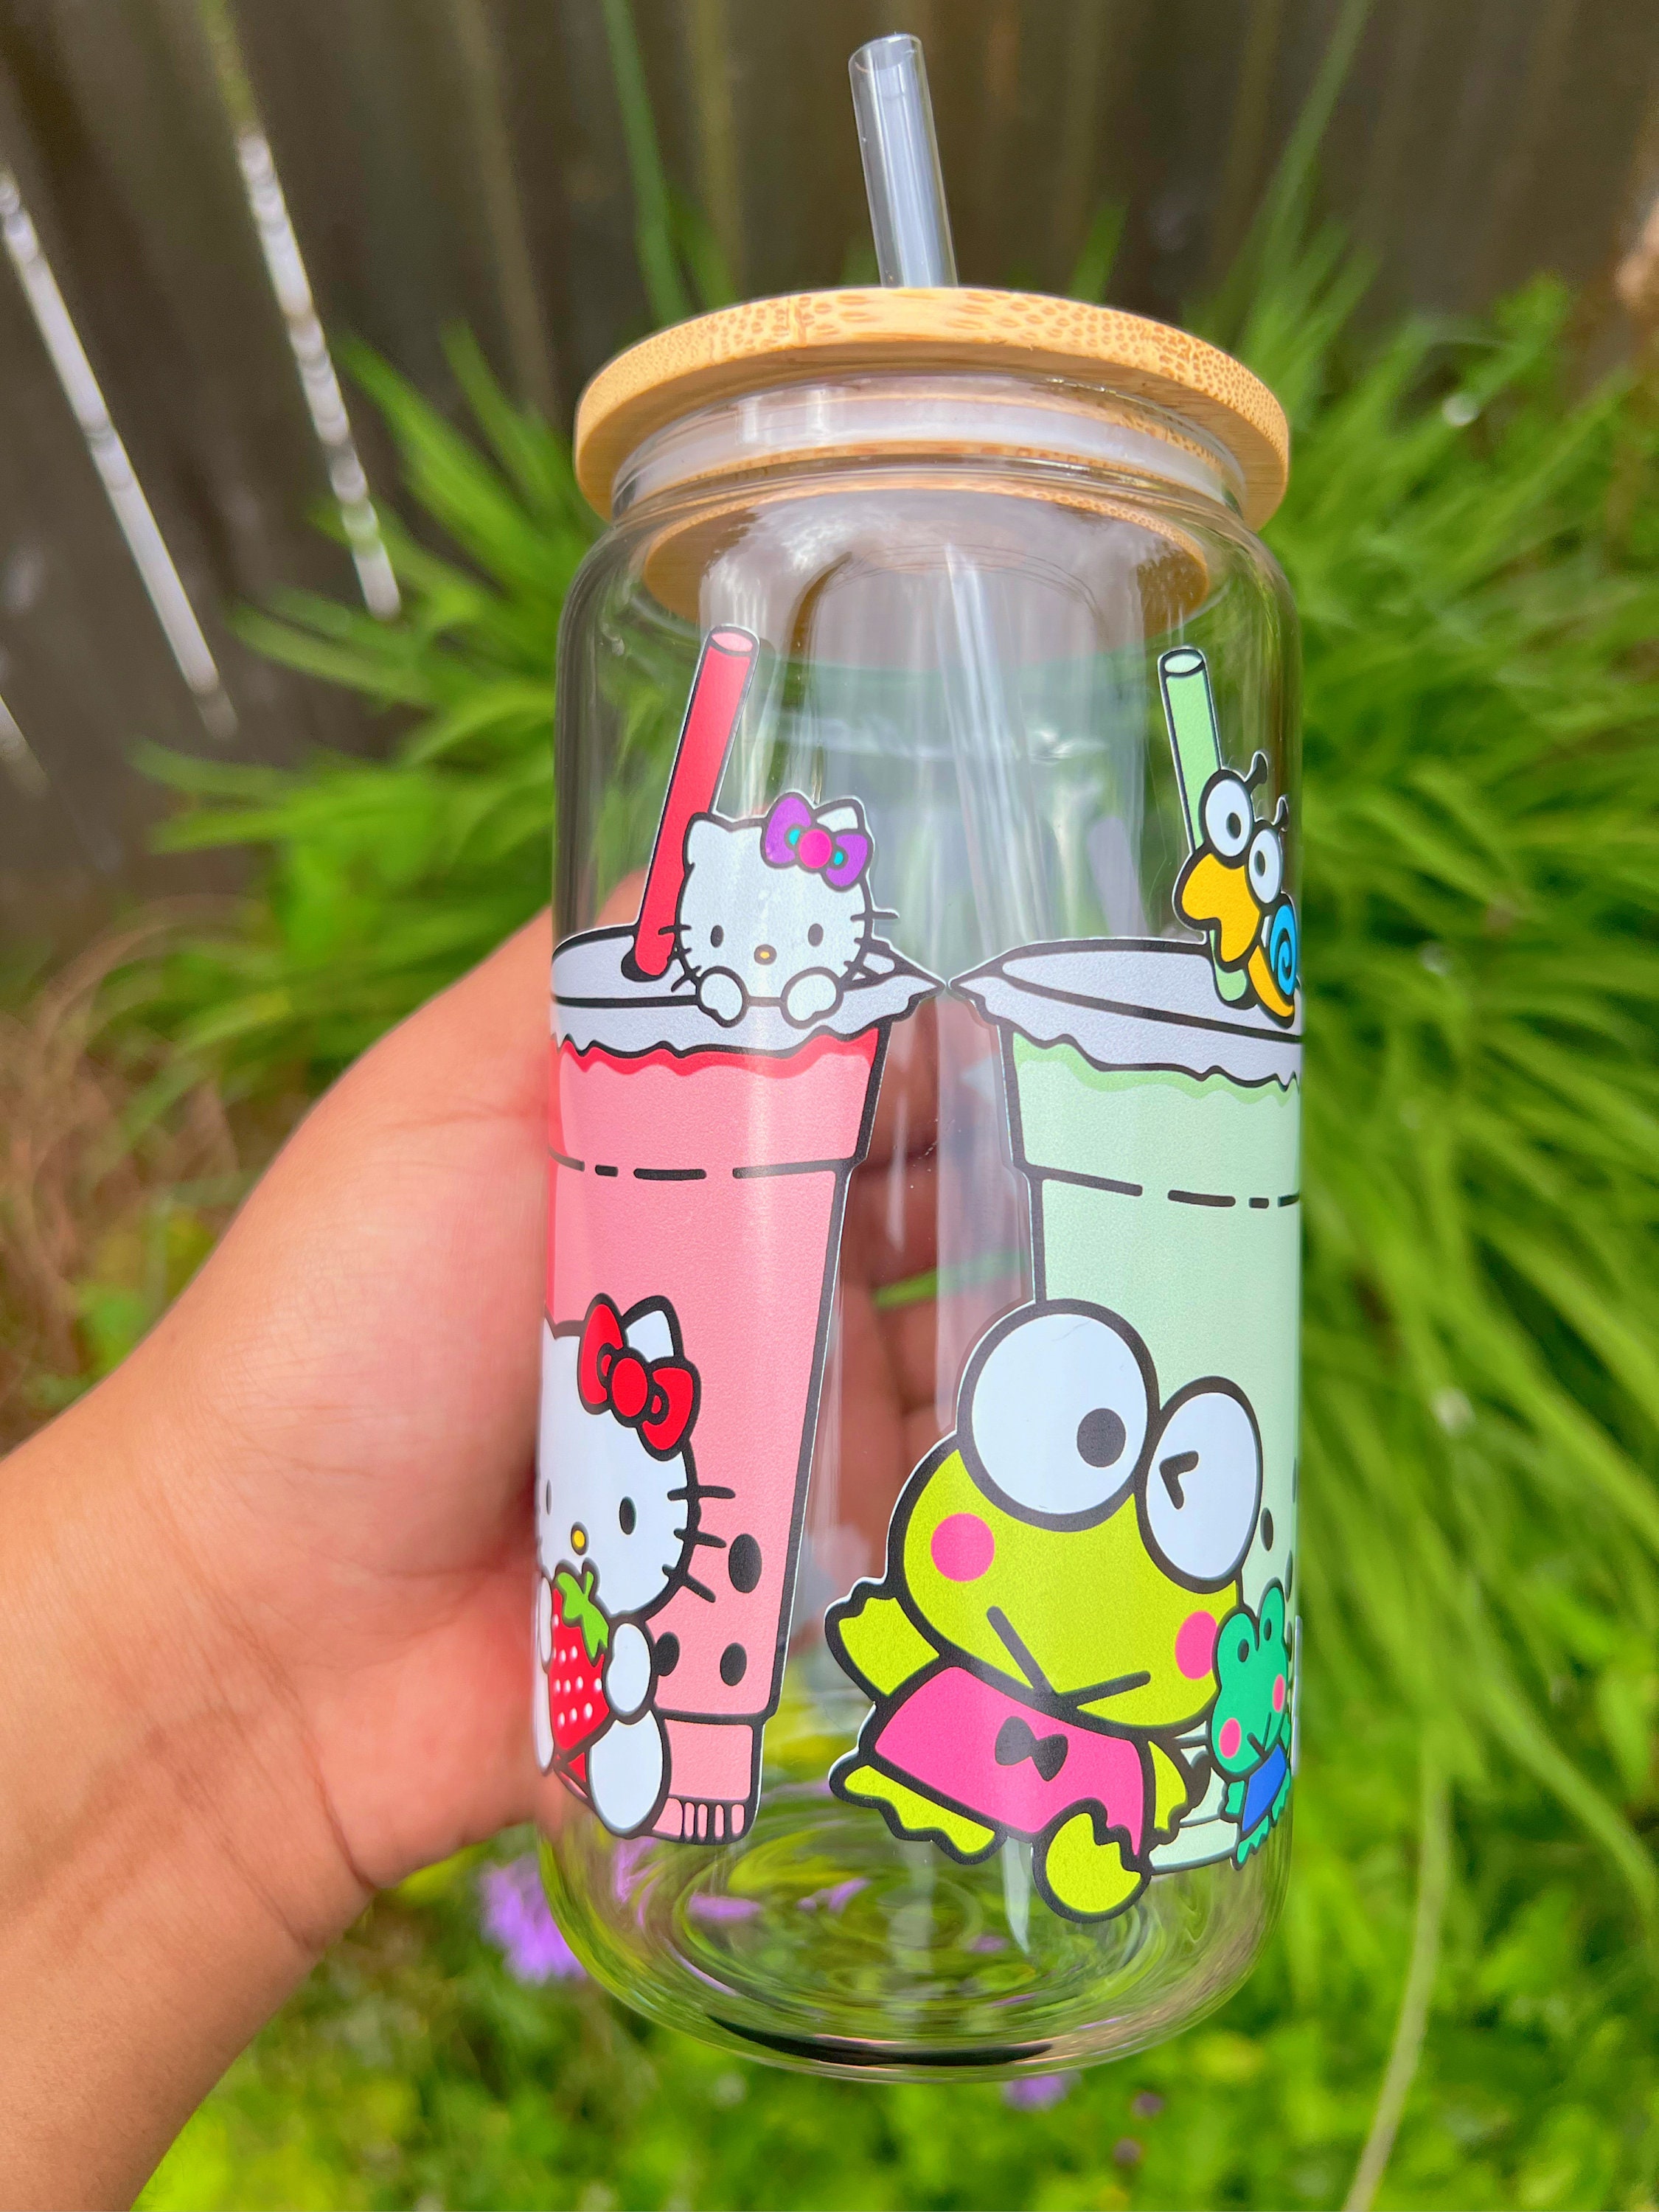 Glass Cups With Lids And Metal Straws, Iced Coffee Cups With Bamboo Lids,  Cute Boba Cup With Non-Slip Sleeve, Clear Drinking Glasses For Bubble Tea,  S - Yahoo Shopping